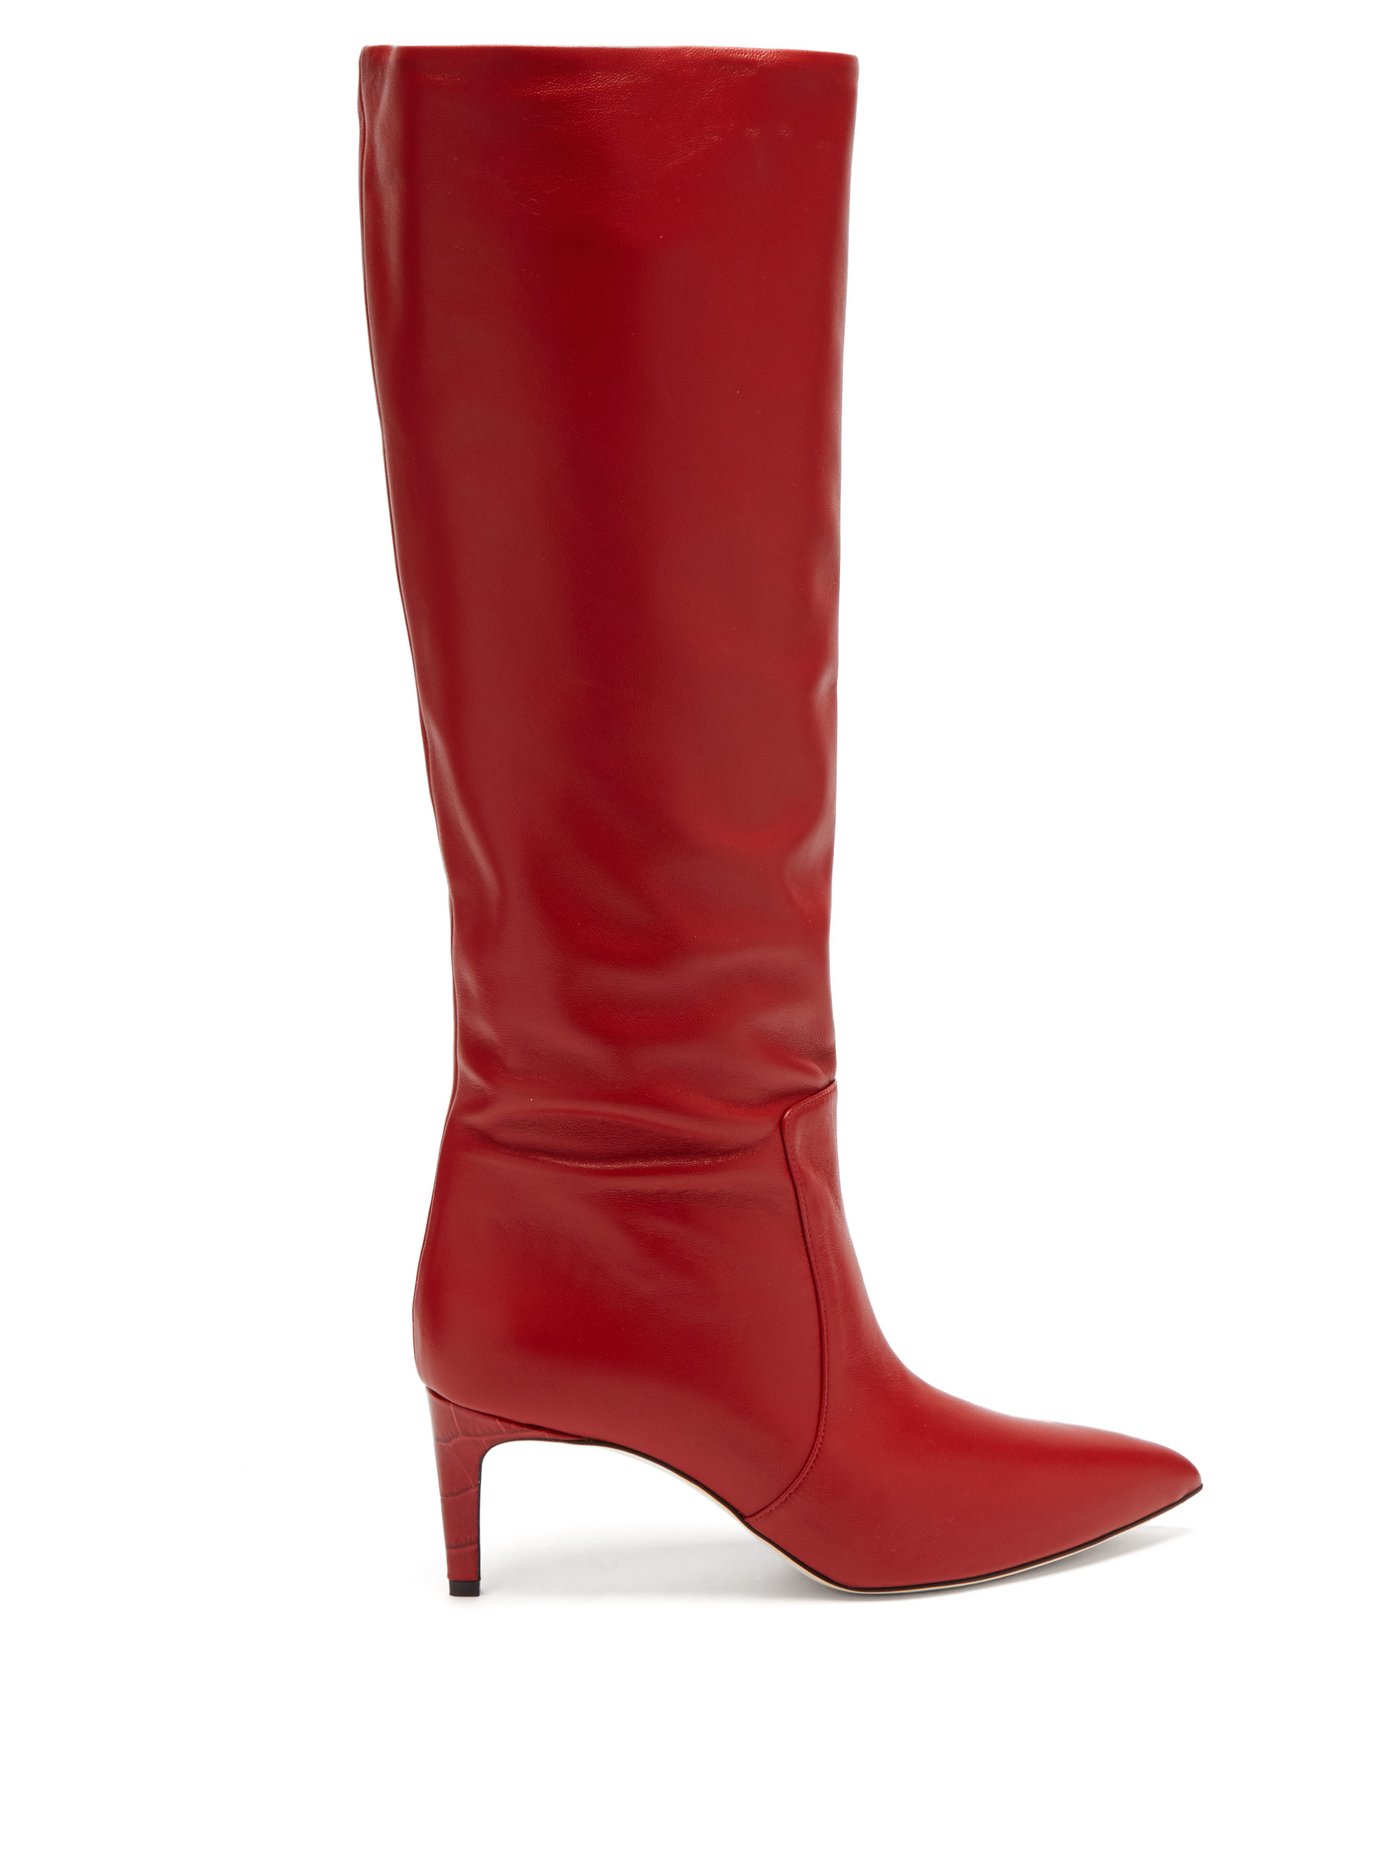 red long boots uk